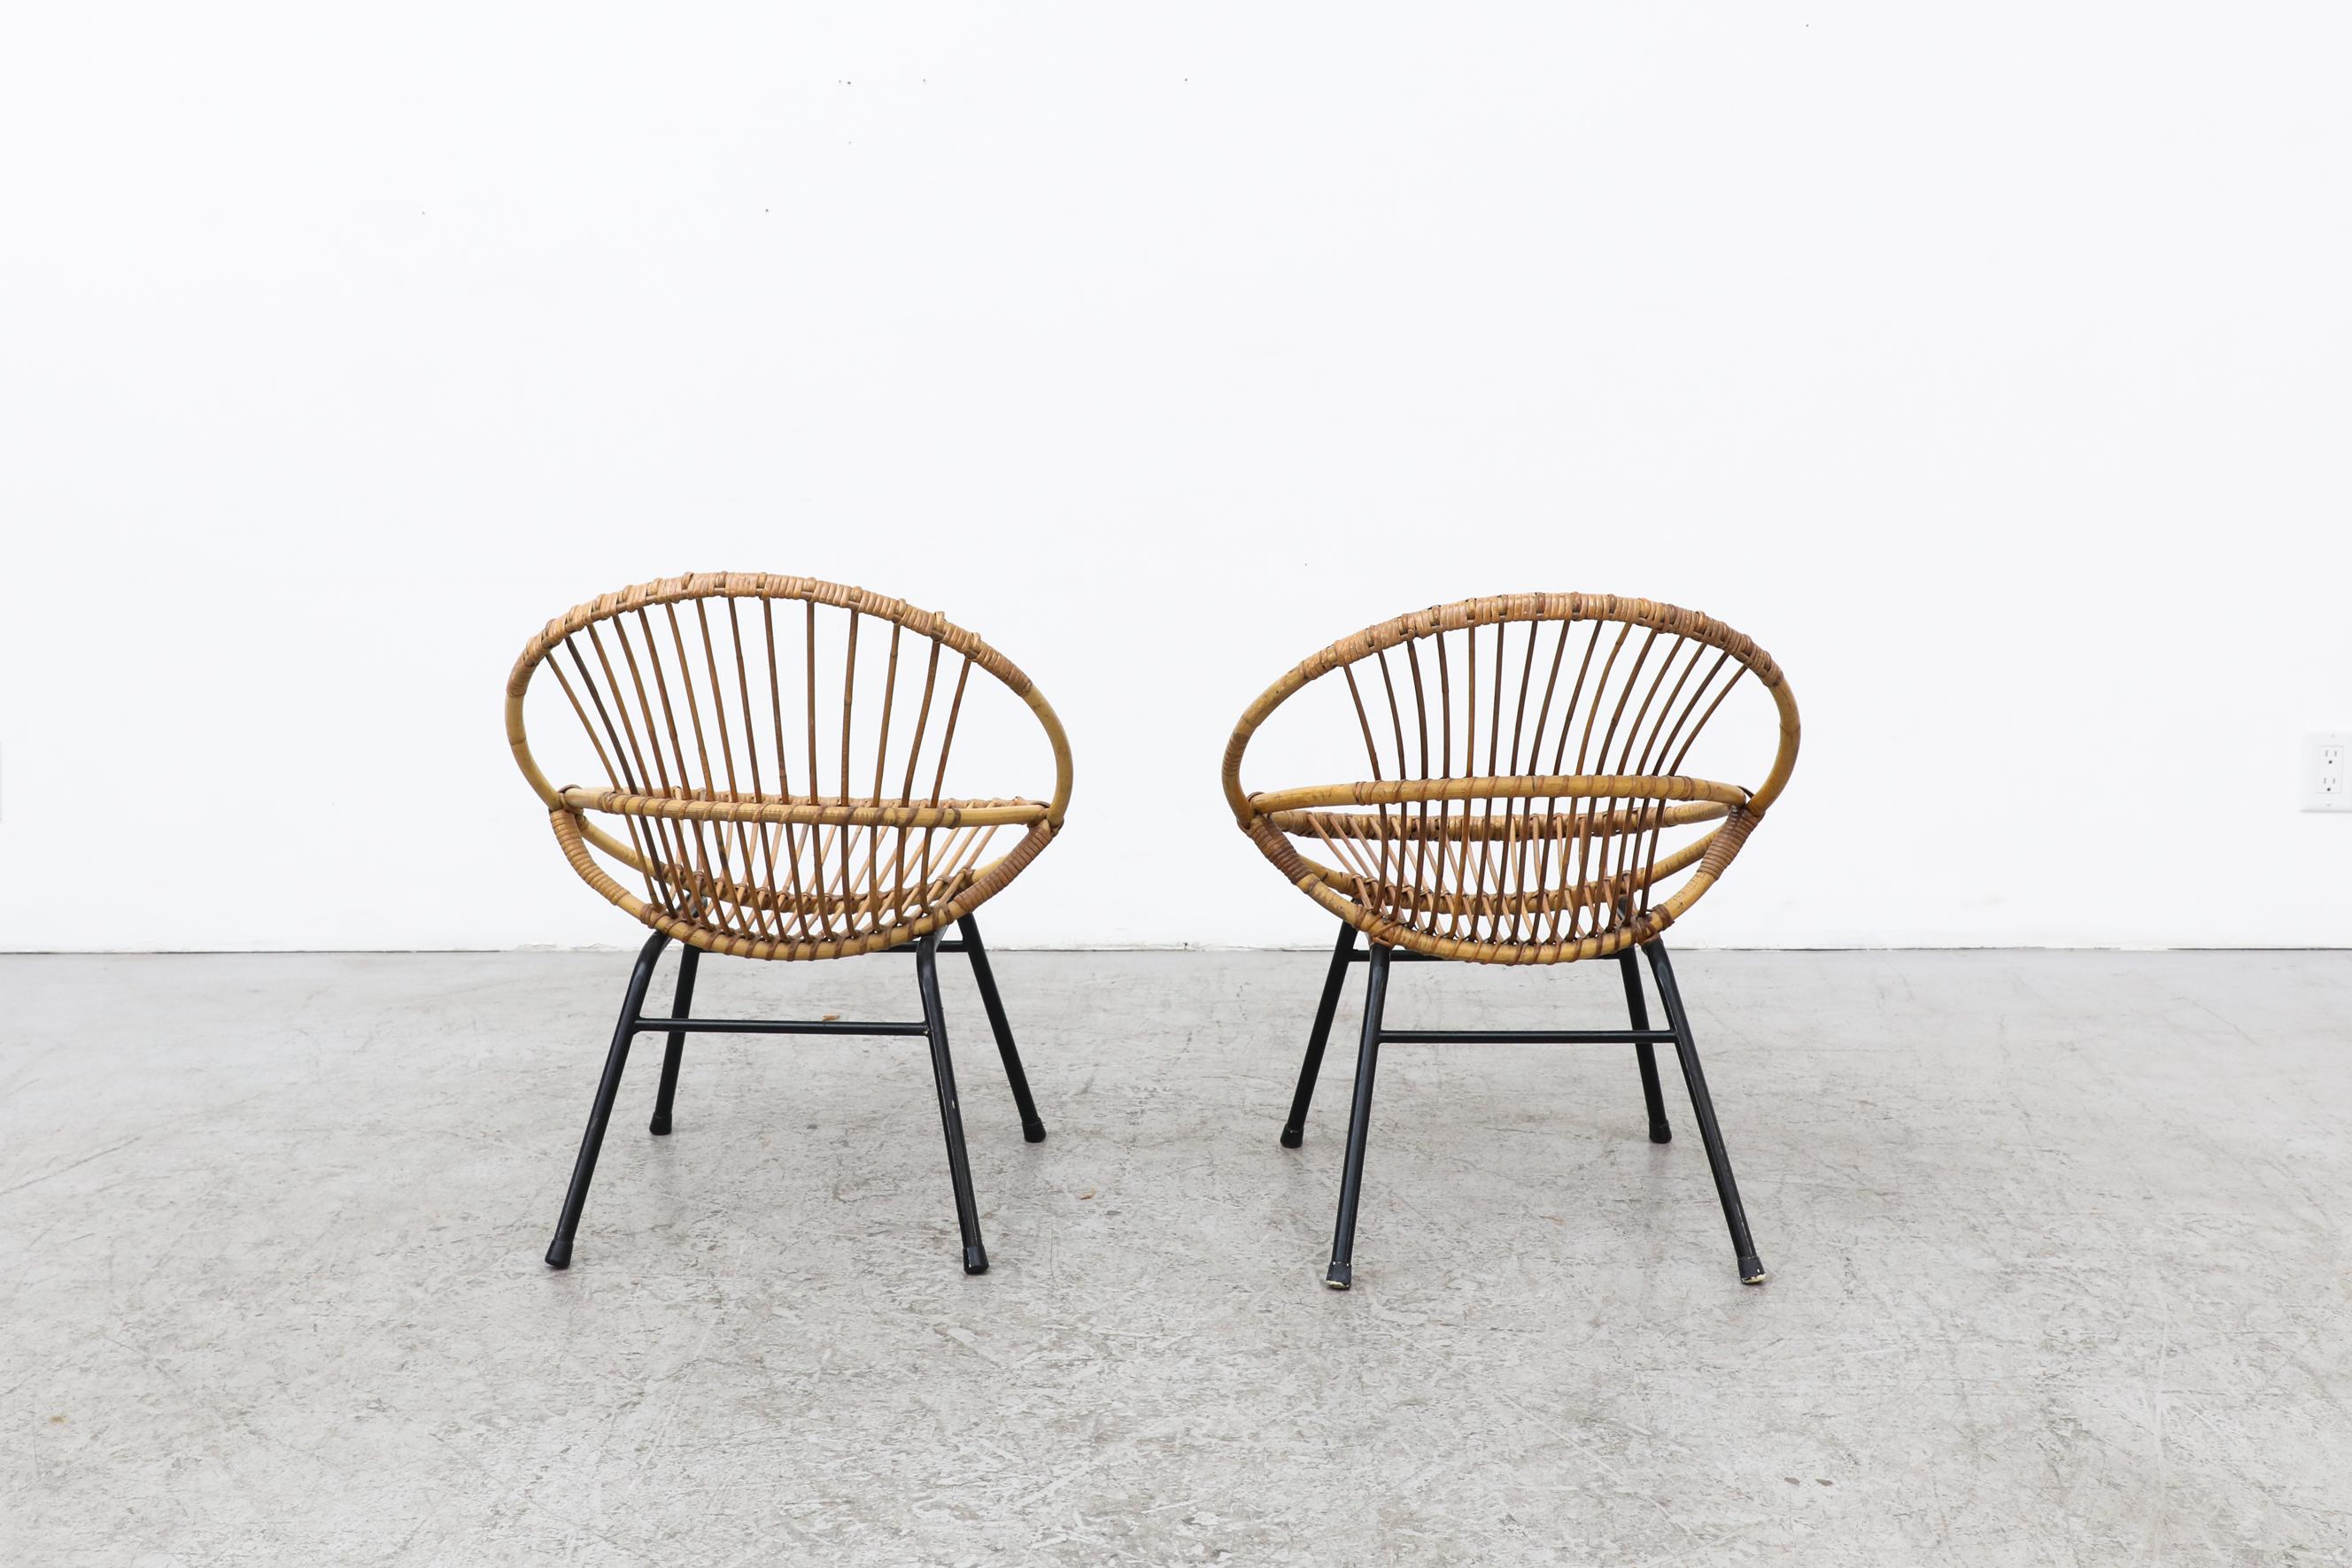 Late 20th Century Pair of Rohe Noordwolde Bamboo Hoop Chairs with Black Tubular Legs For Sale